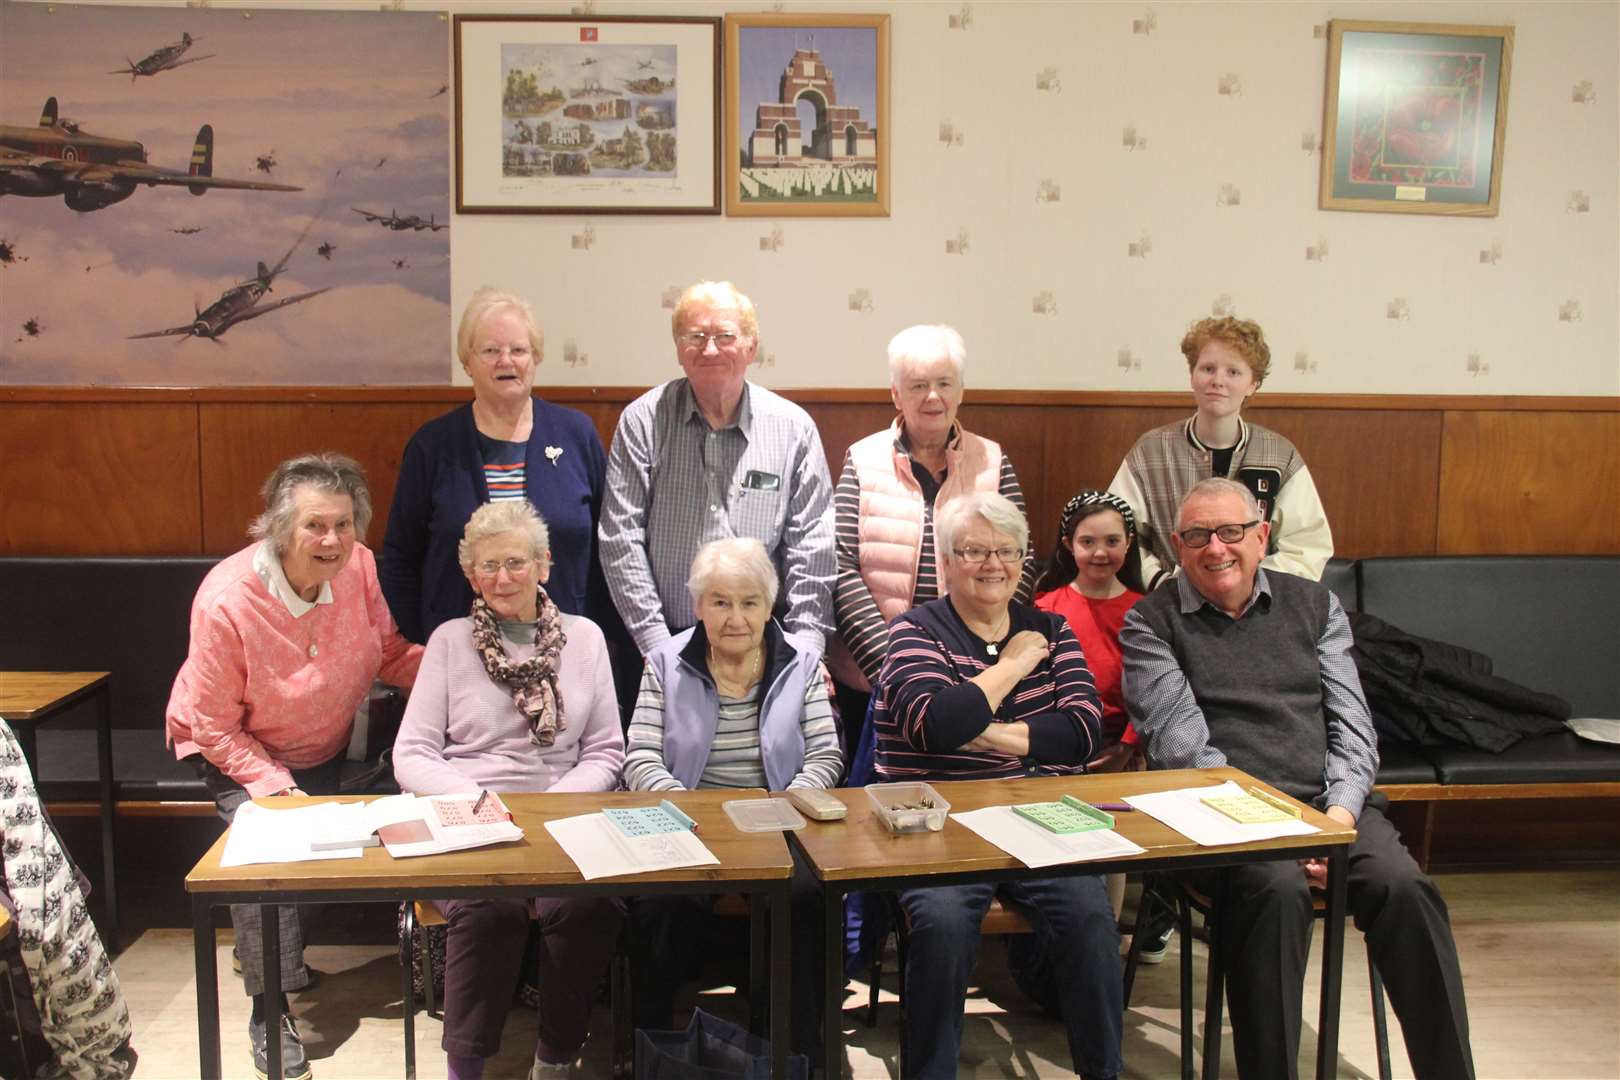 Turriff And District Heritage Society volunteers. Picture: Kirsty Brown